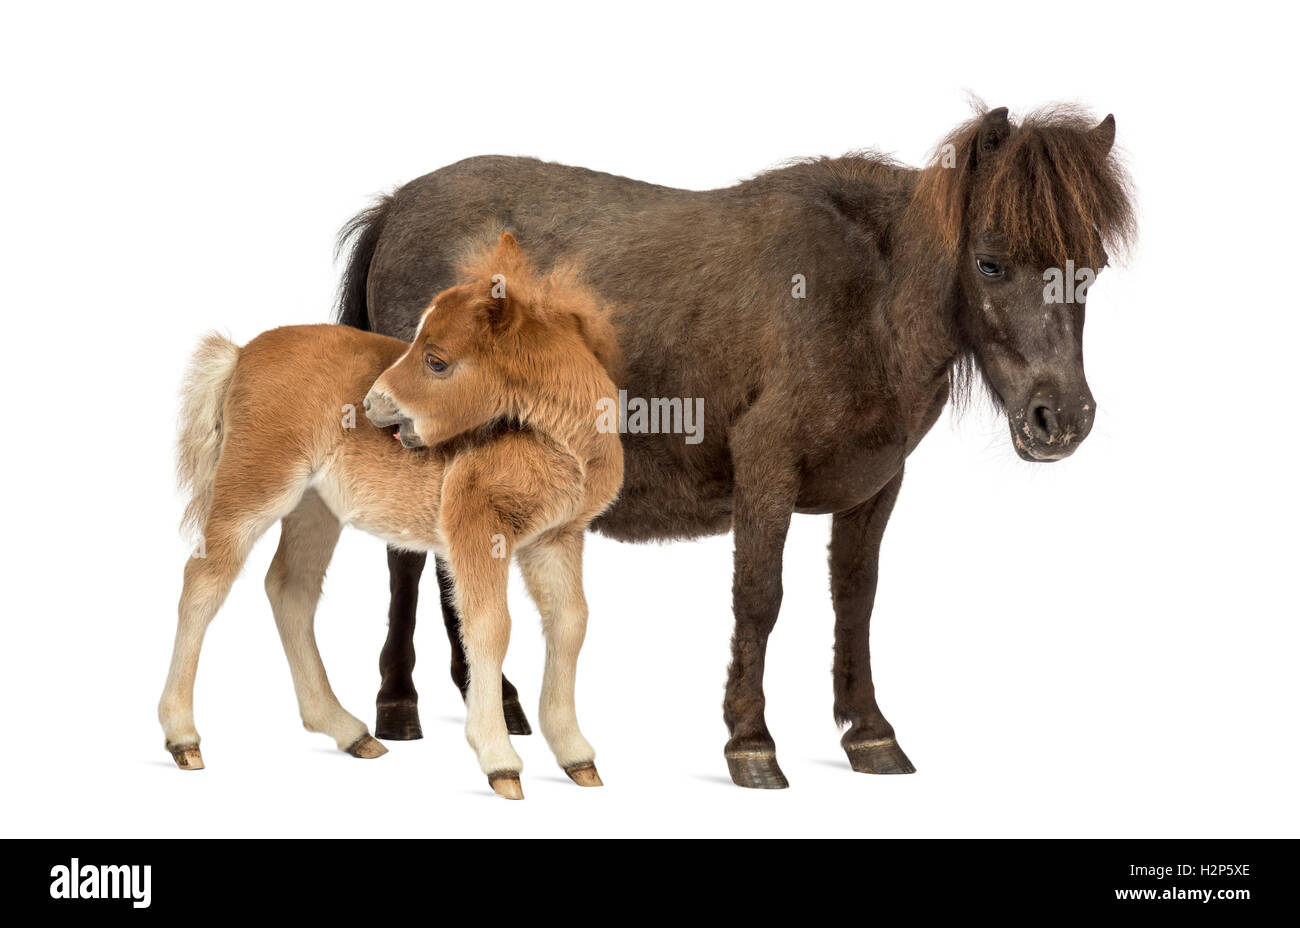 Side view of a Mother poney and her foal scratching against a white background Stock Photo